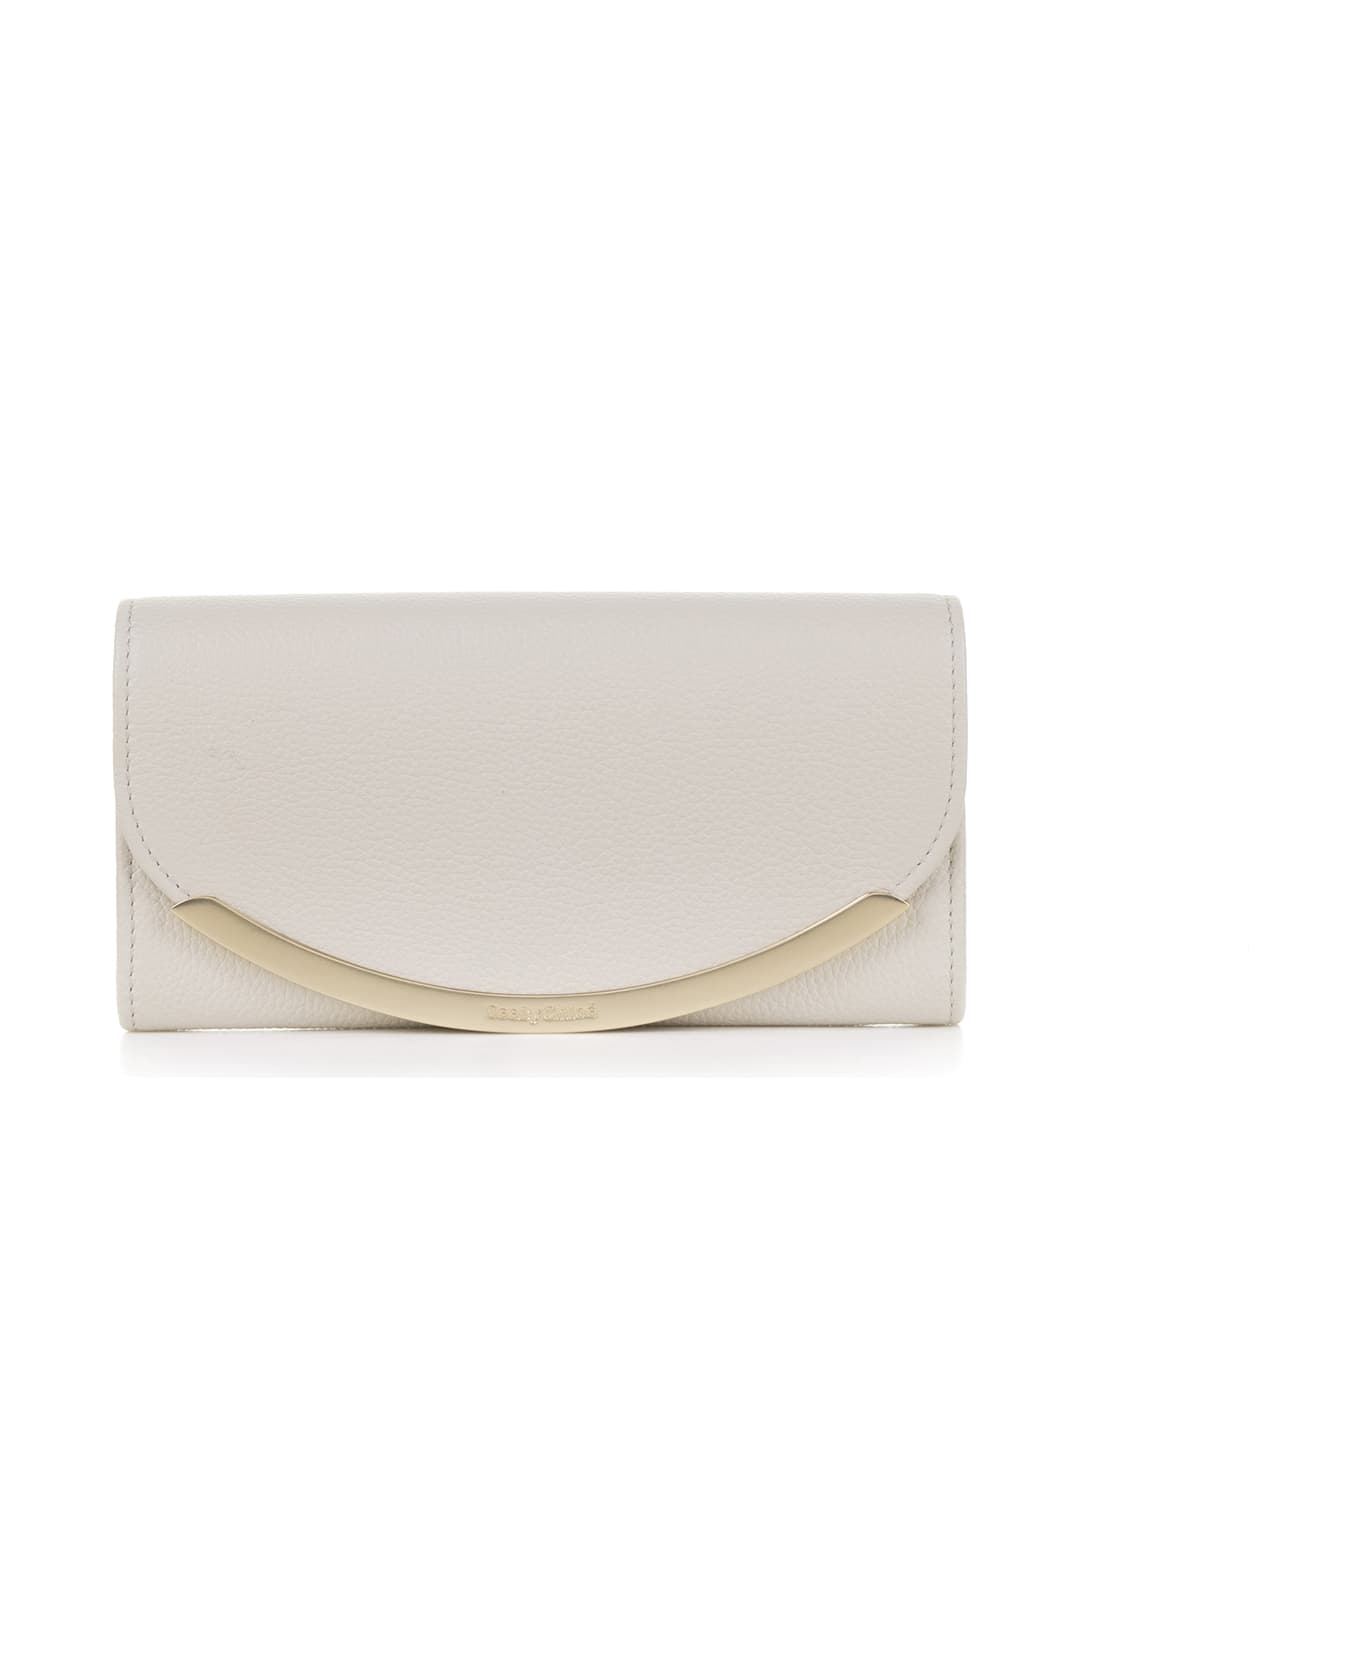 See by Chloé Wallet - CEMENT BEIGE